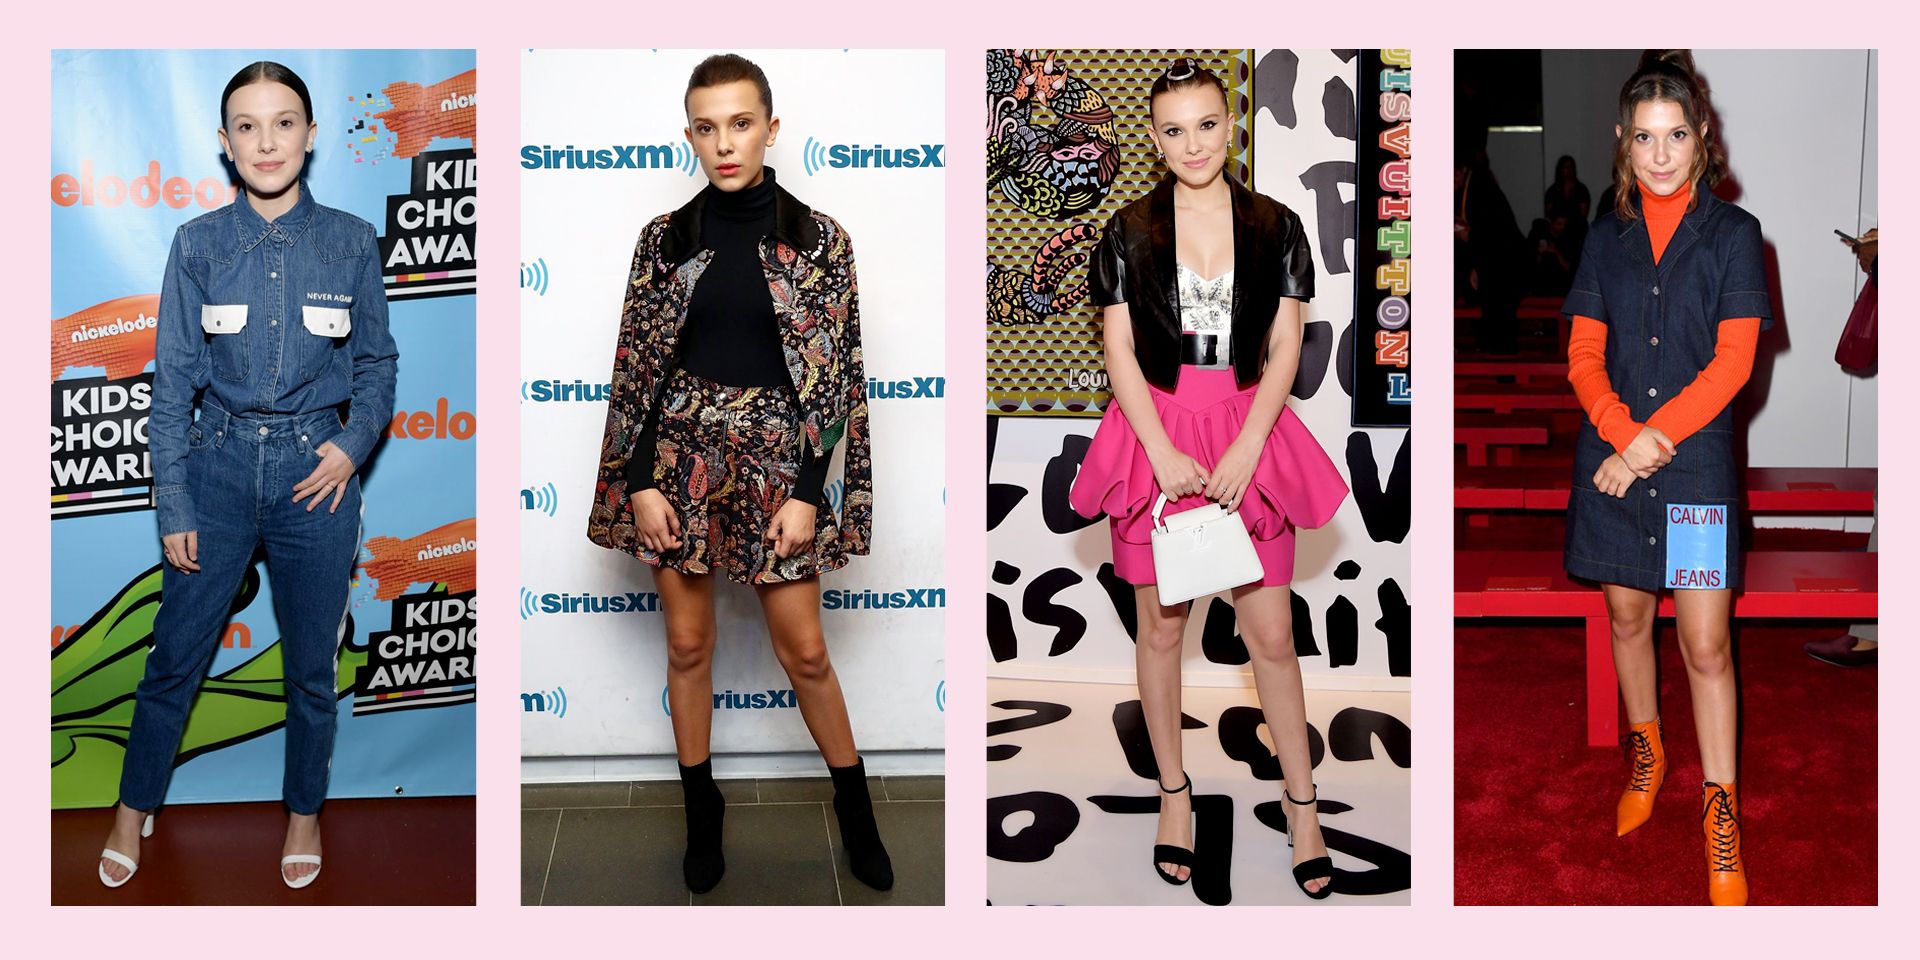 11 of Millie Bobby Brown's best red carpet looks